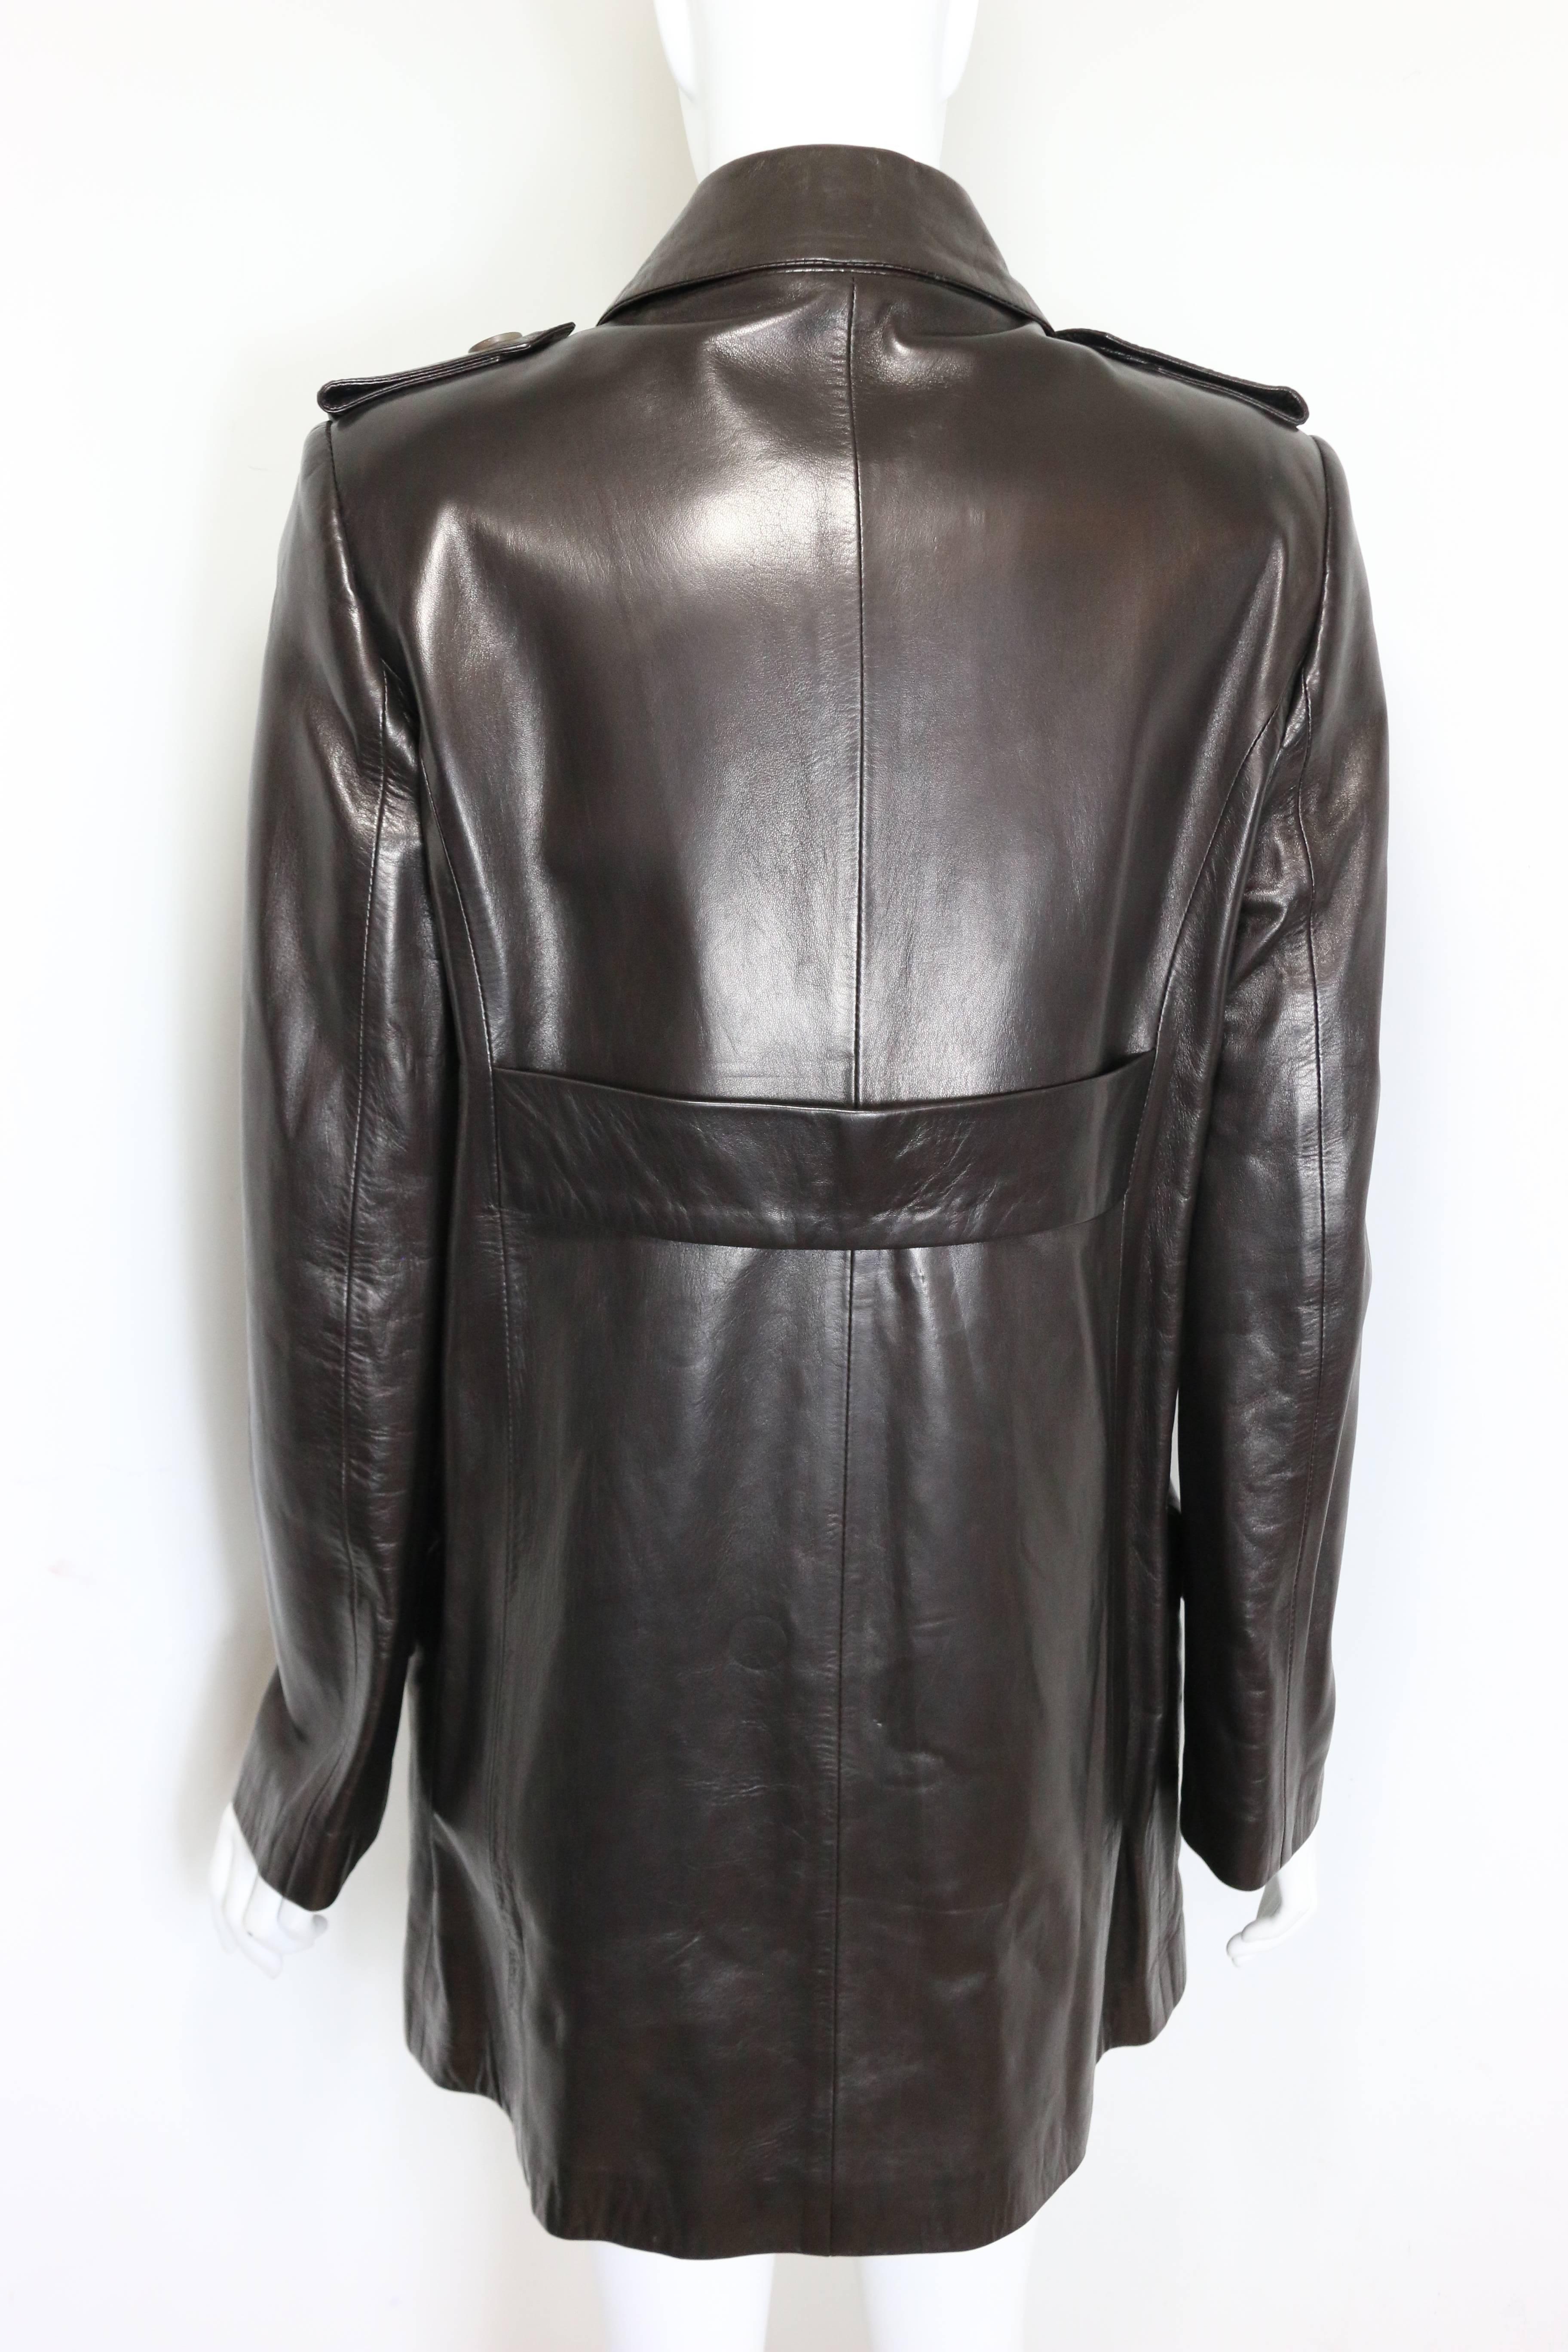 - Gucci by Tom Ford brown lambskin leather double breasted Jacket from Fall 1996 collection. 

- Featuring buttons fastening, four front flap pockets, epaulette style with shoulder button details and a strap at the back. 

- Made in Italy. 

- Size